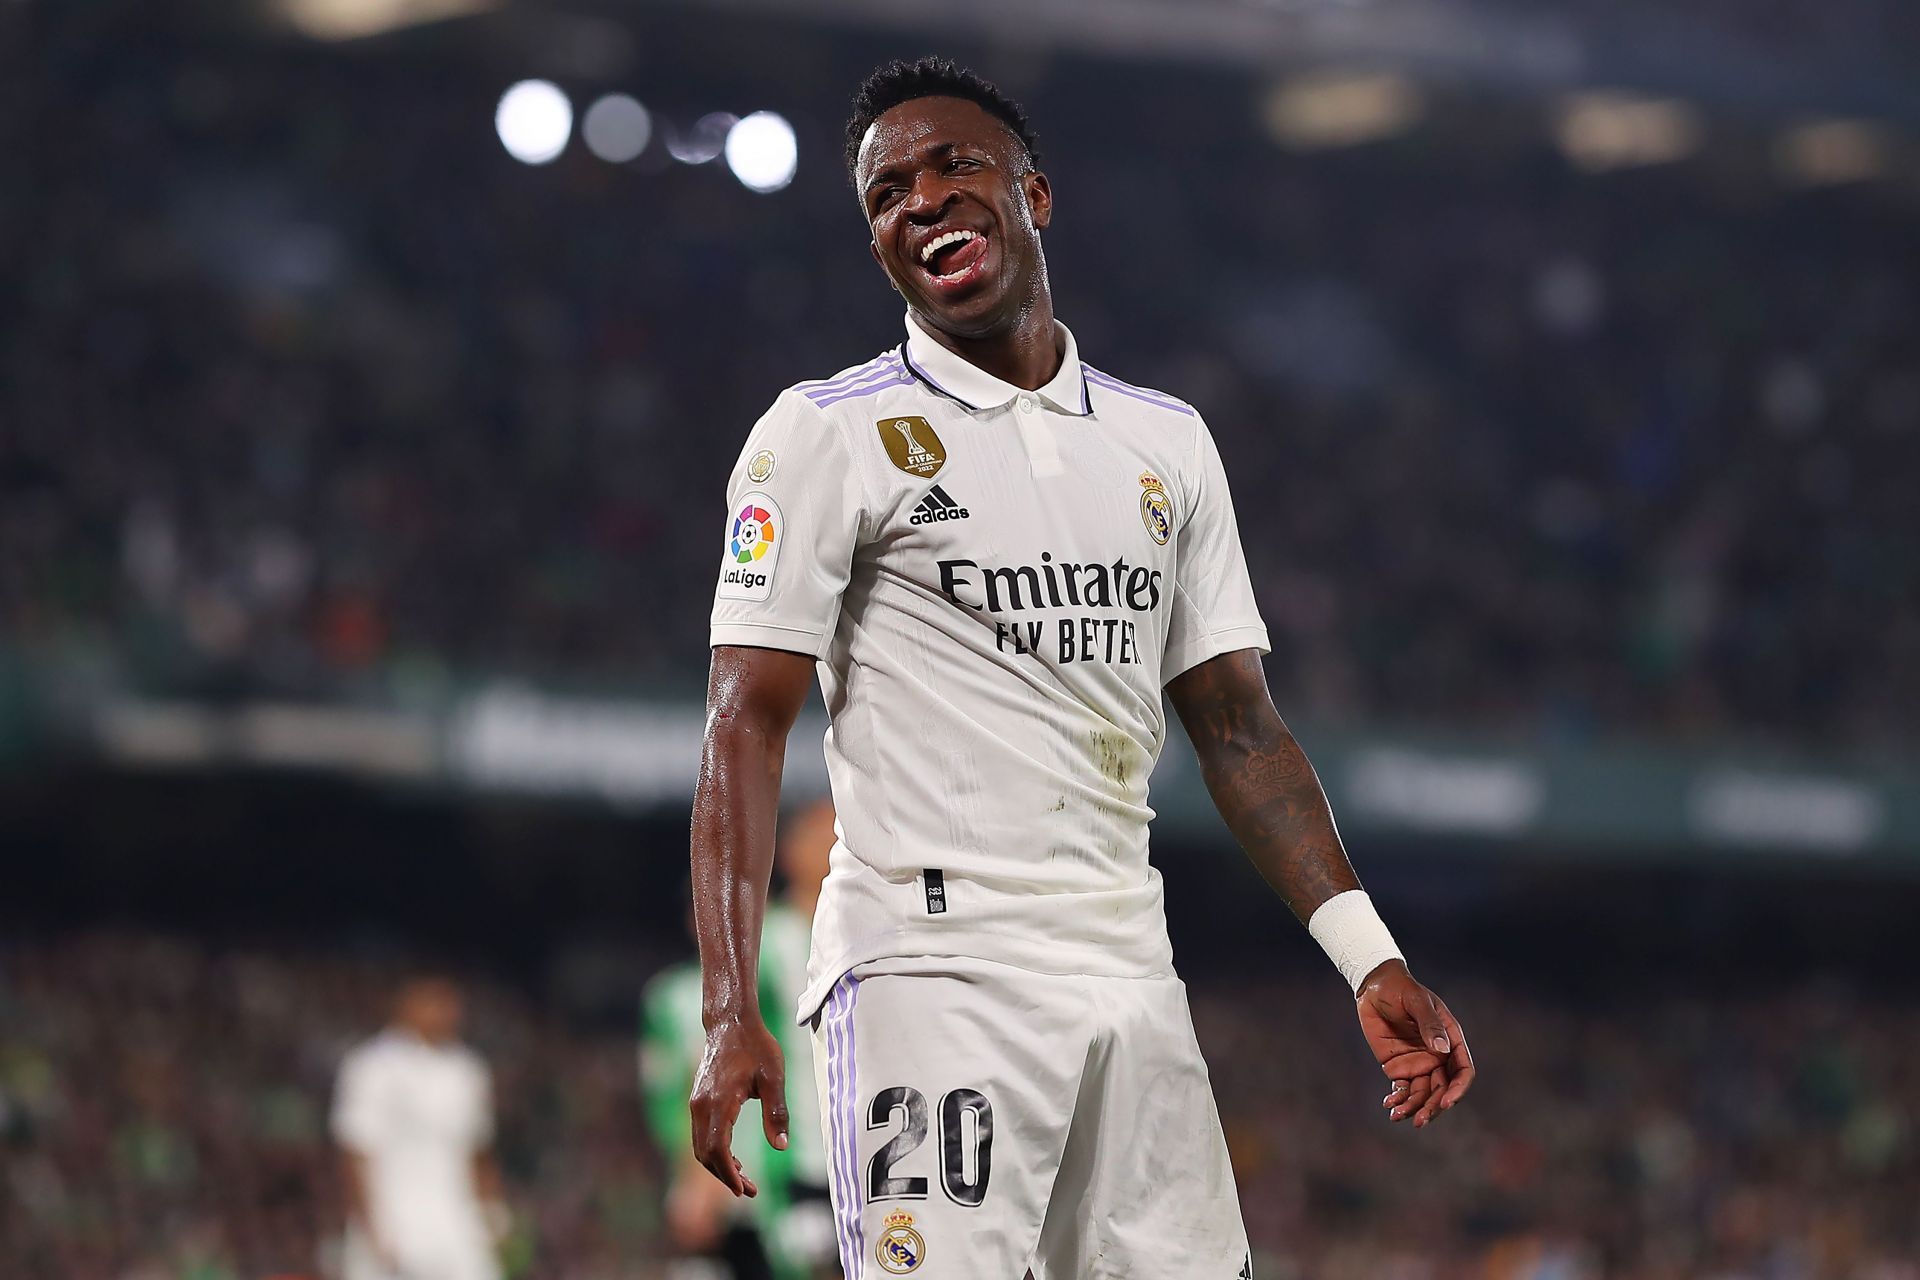 Vinicius Junior has been in good form for Real Madrid this season.